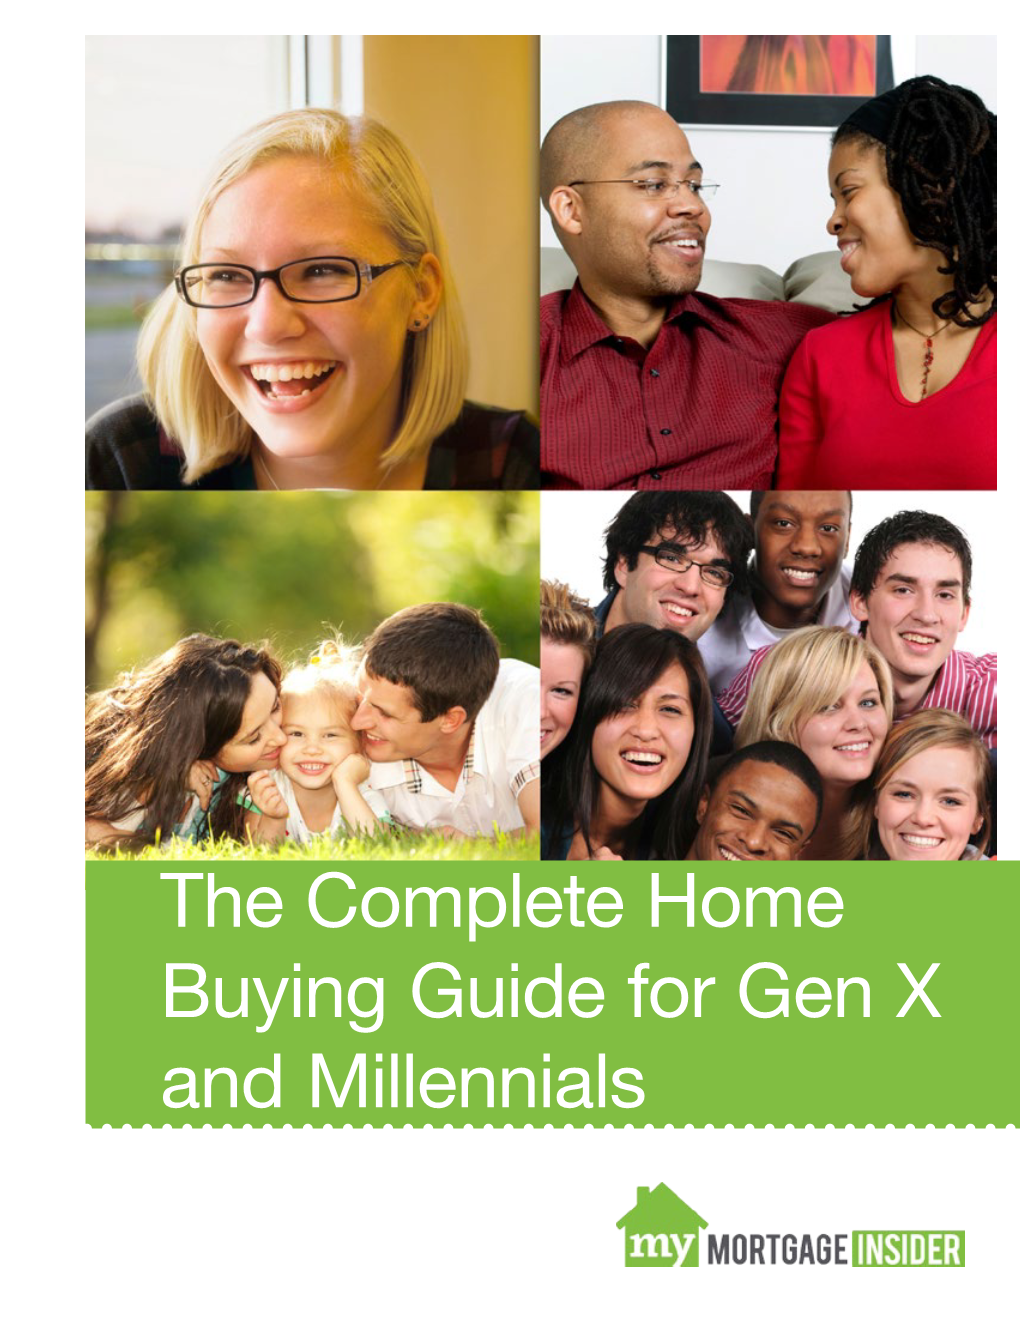 The Complete Home Buying Guide for Gen X and Millennials Contents